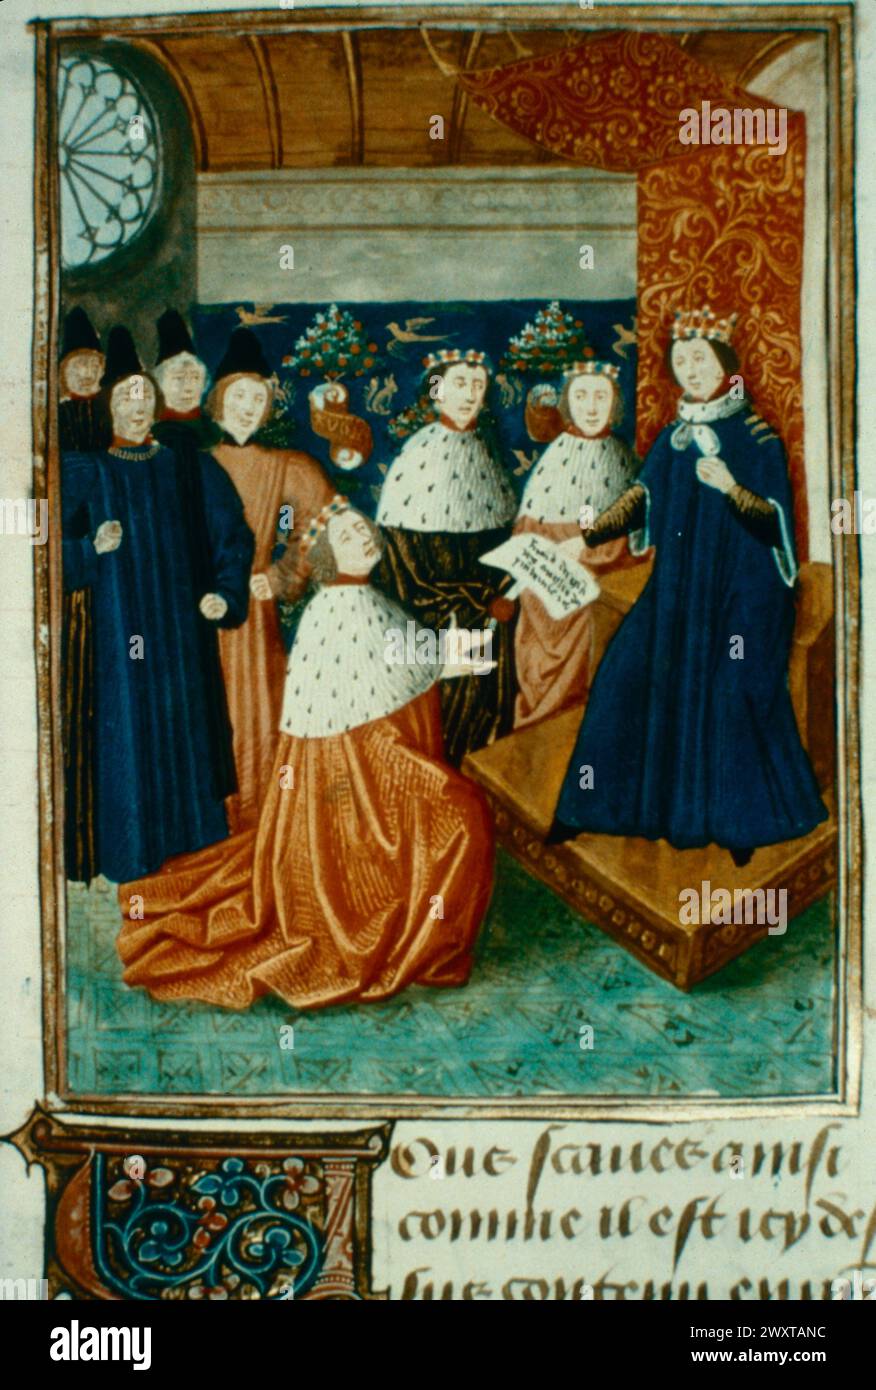 Richard II, King of England, gives Aquitane to John of Gaunt, illustration in Froissart's Chroniques, 1400s Stock Photo